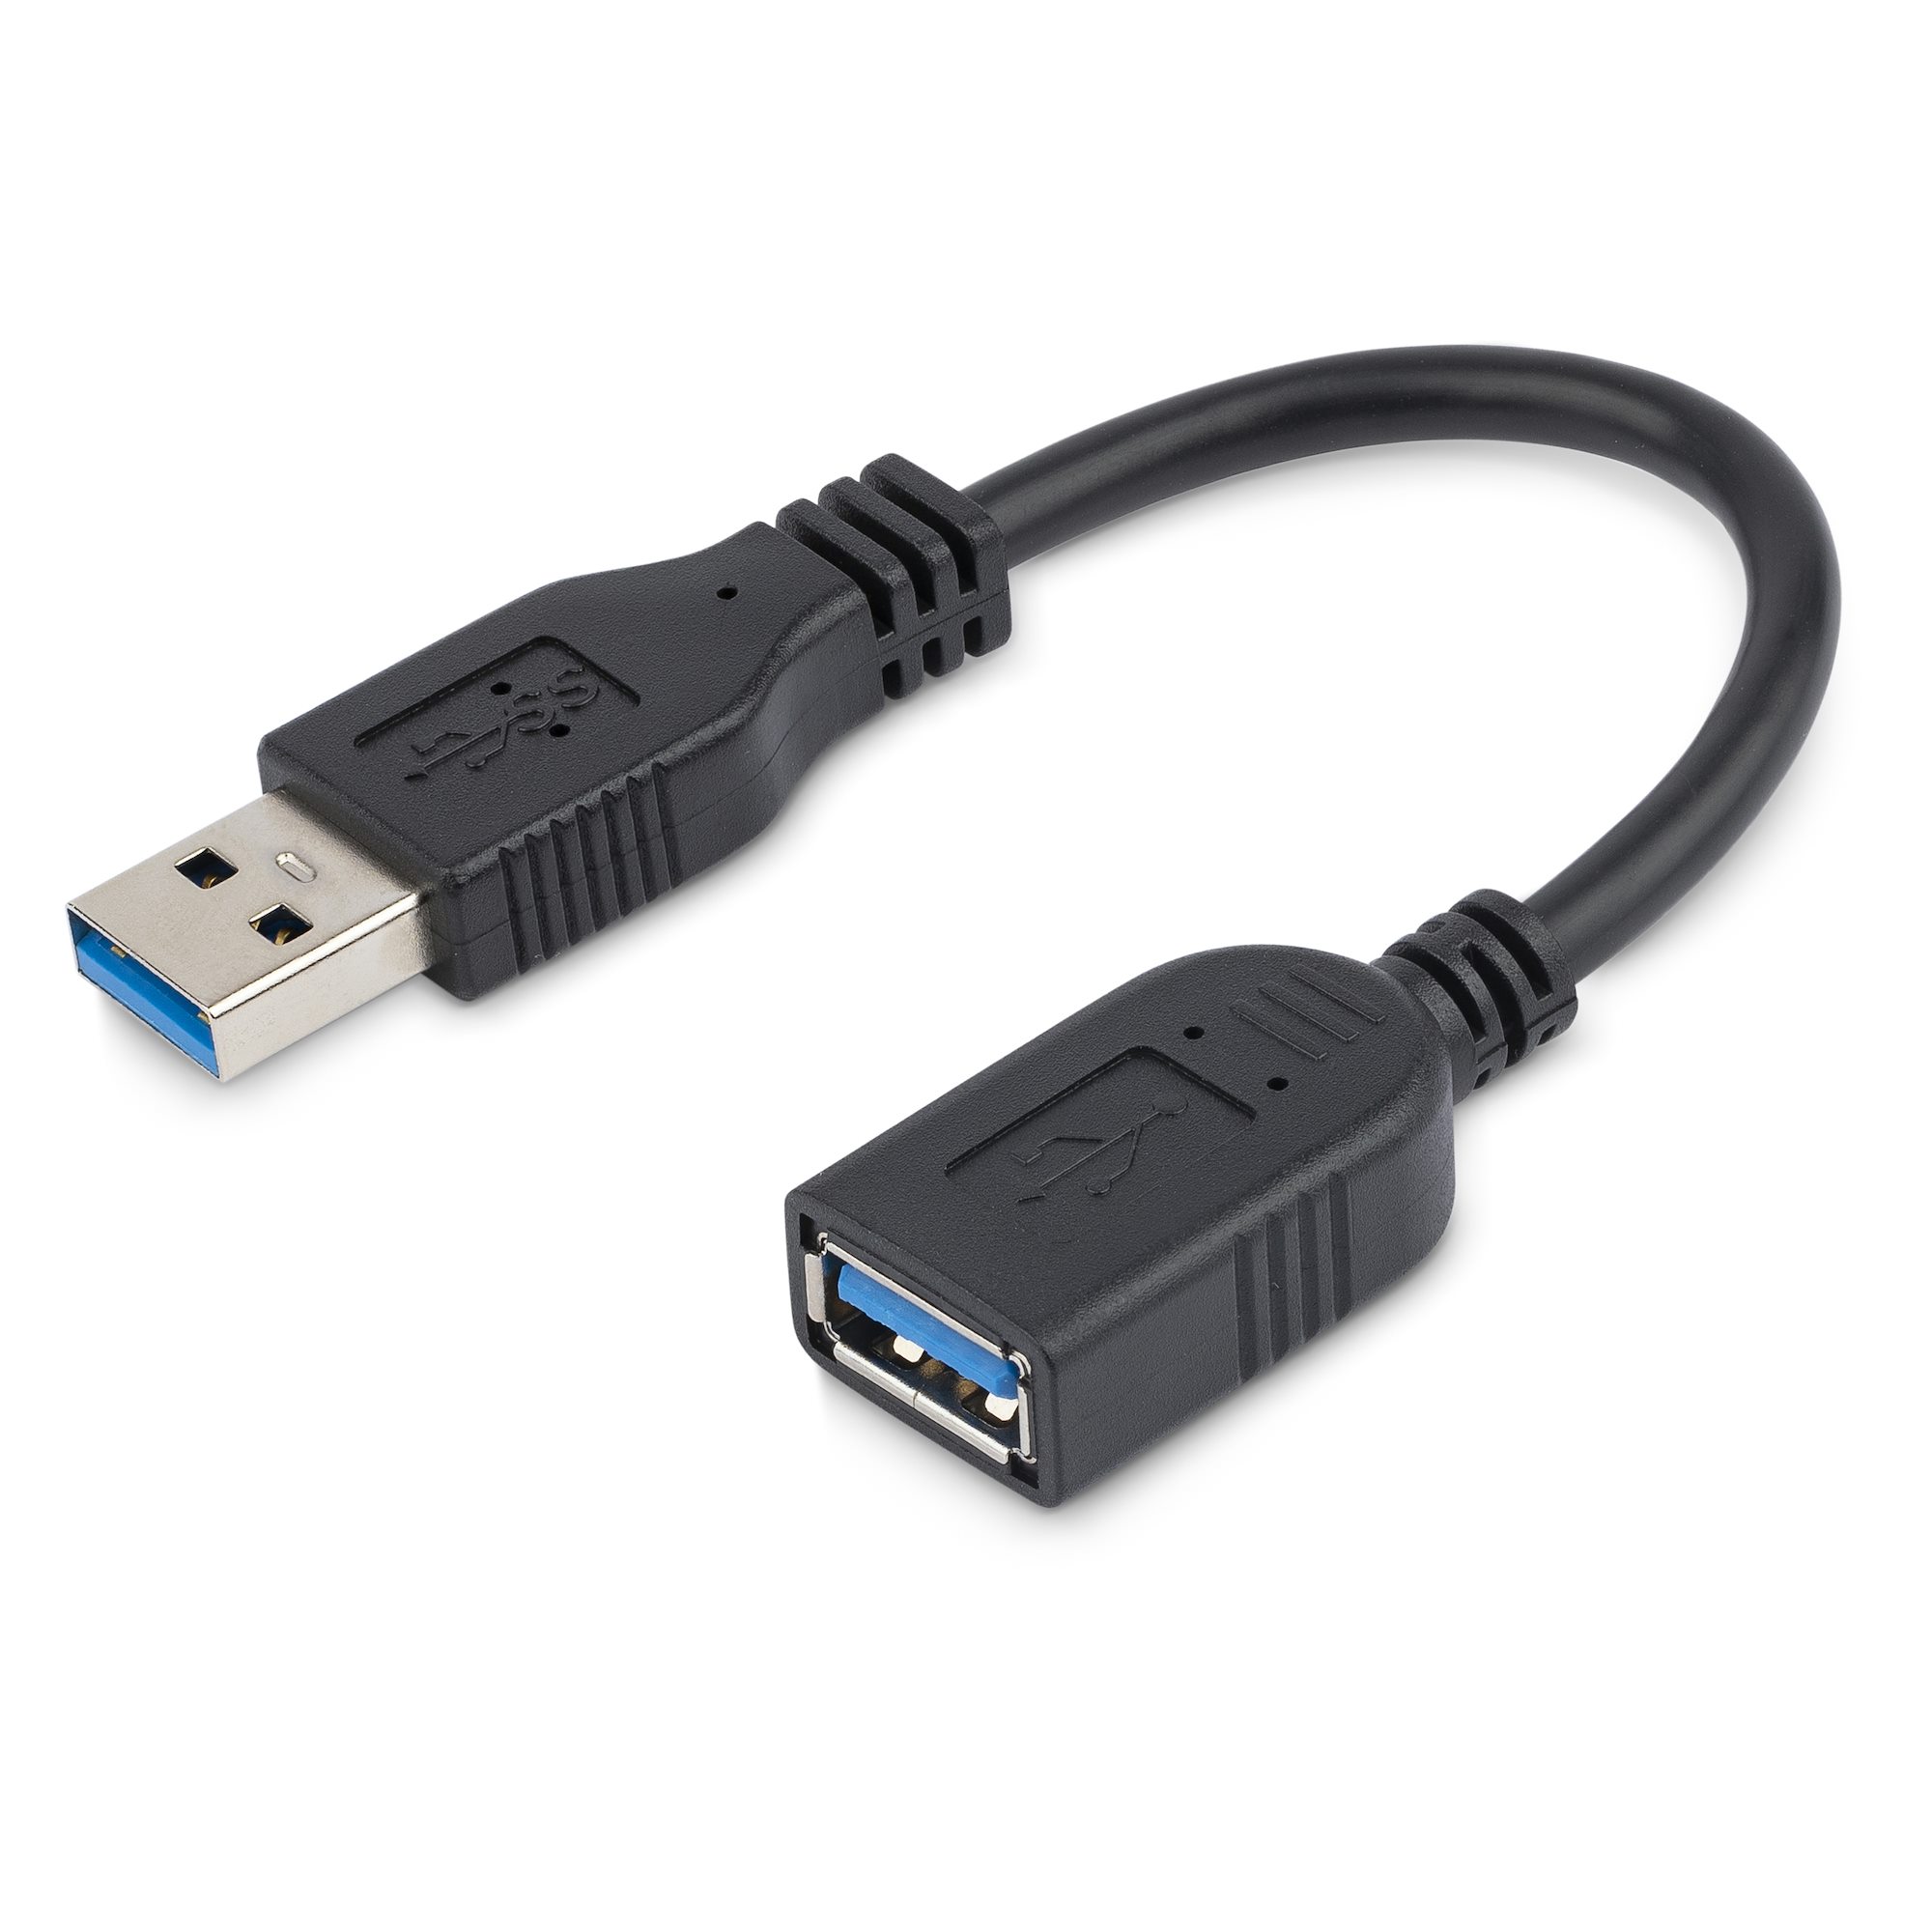 6in Black USB 3.0 Cable A to A - USB 3.0 Cables | StarTech.com